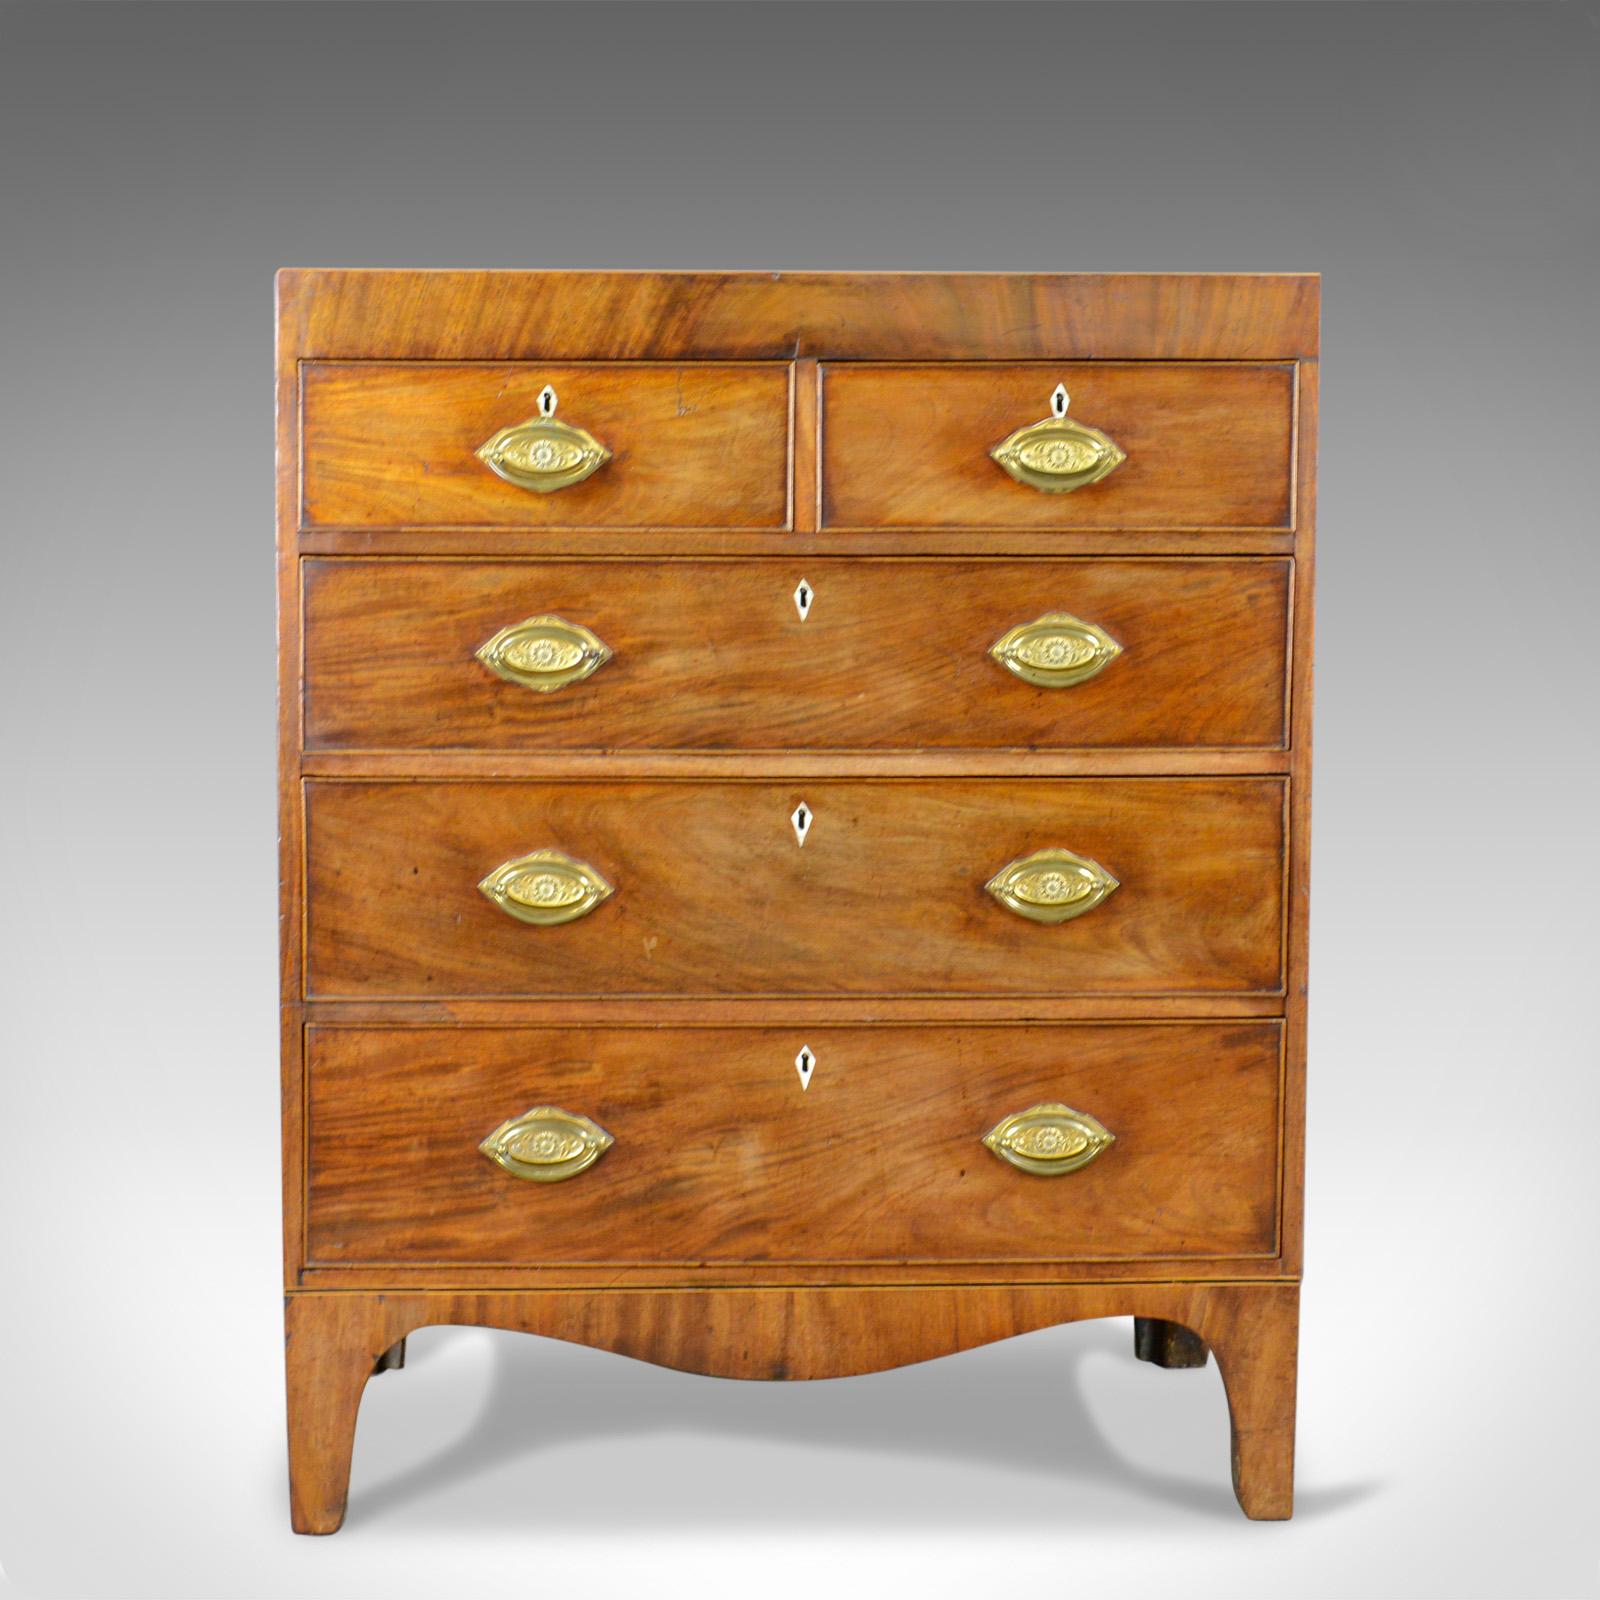 This is a fine example of an antique chest of drawers in the manner of Sheraton, English from the late Georgian era circa 1780.

In quality mahogany with attractive grain and good color
Useful shallow proportions arranged in a classic '2 over 3'